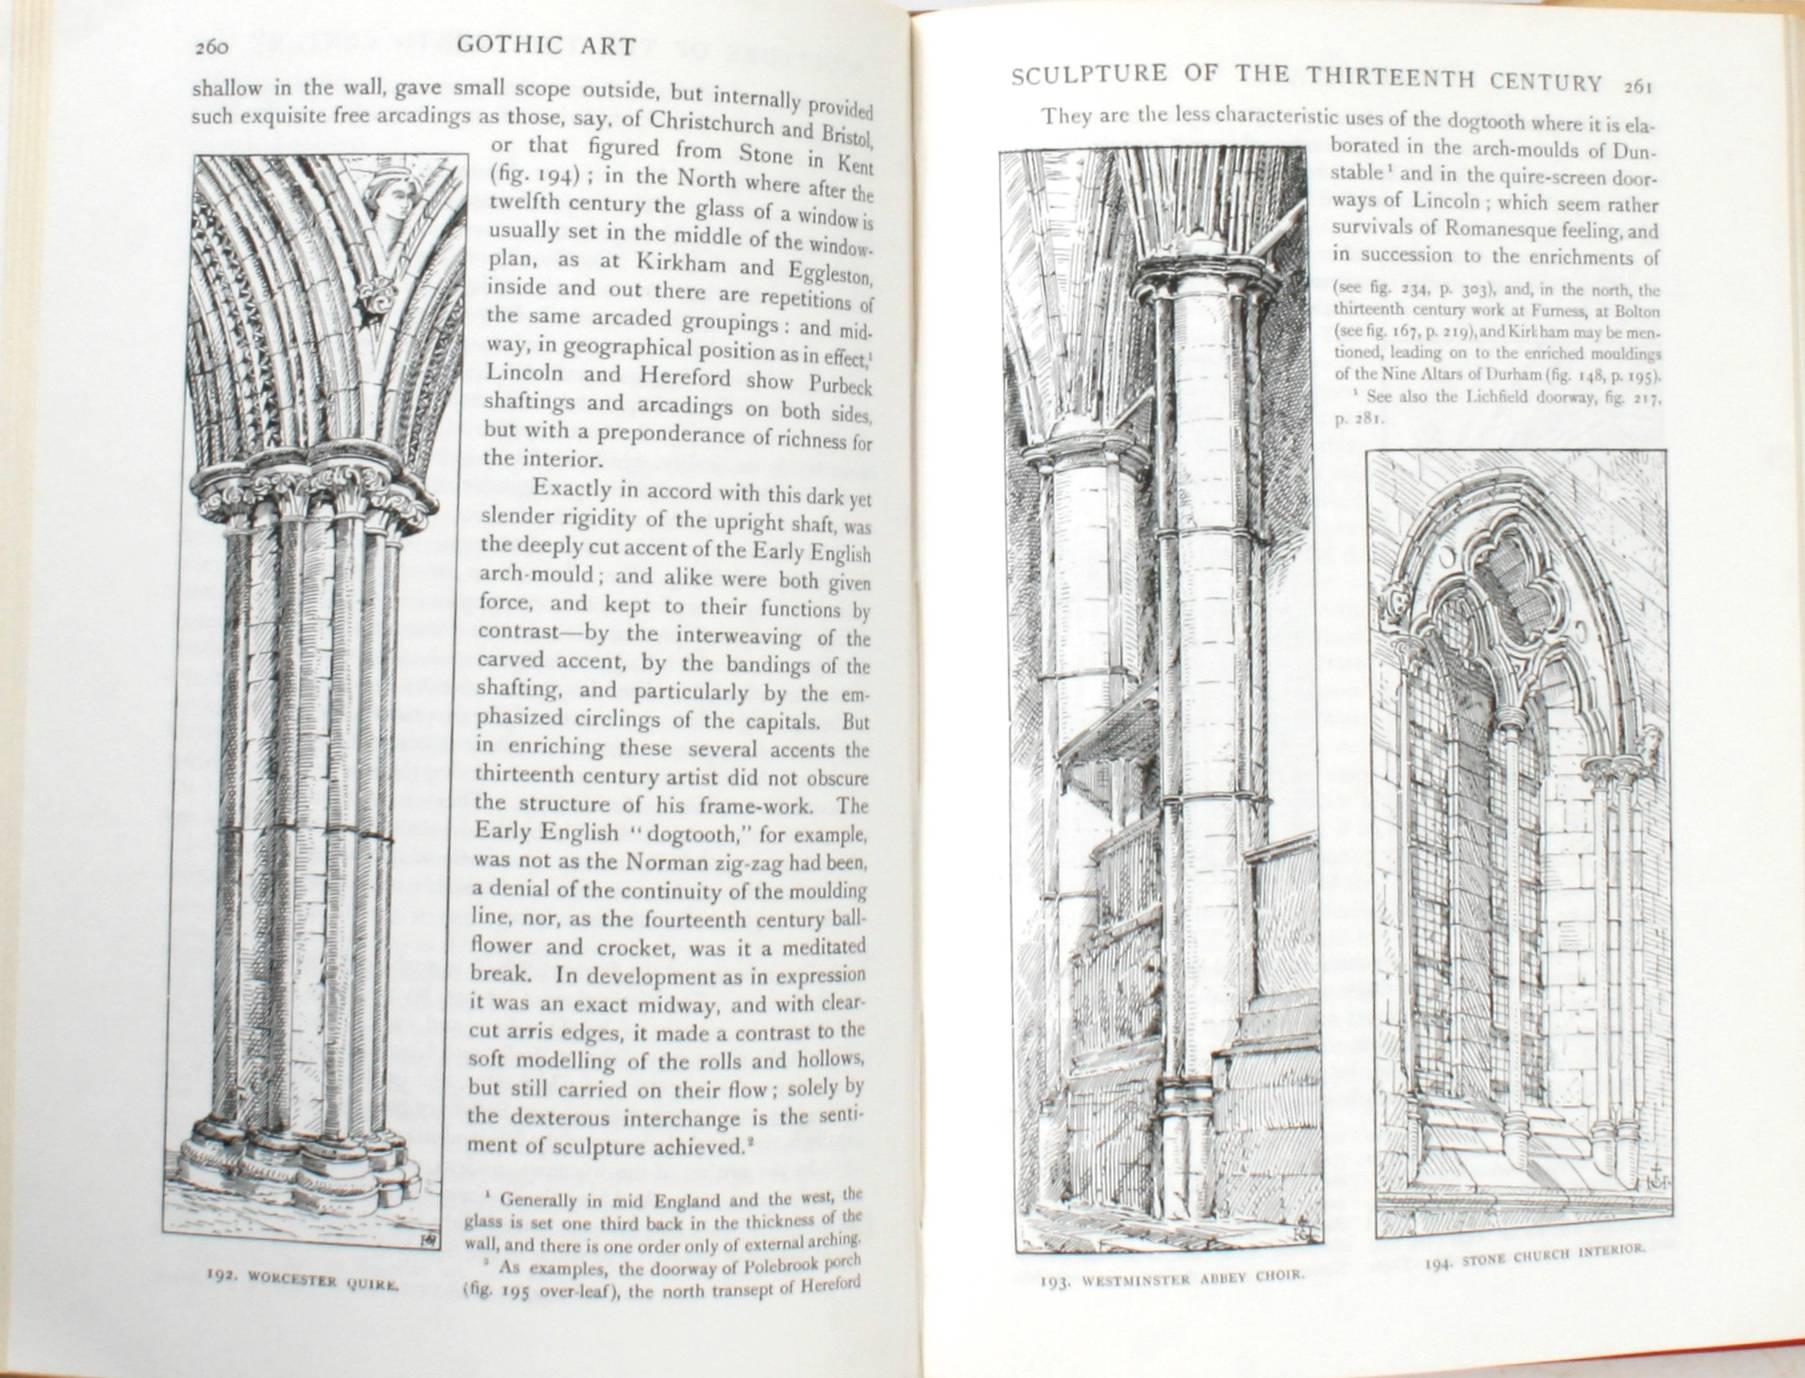 Paper History of Gothic Art in England by Edward S. Prior